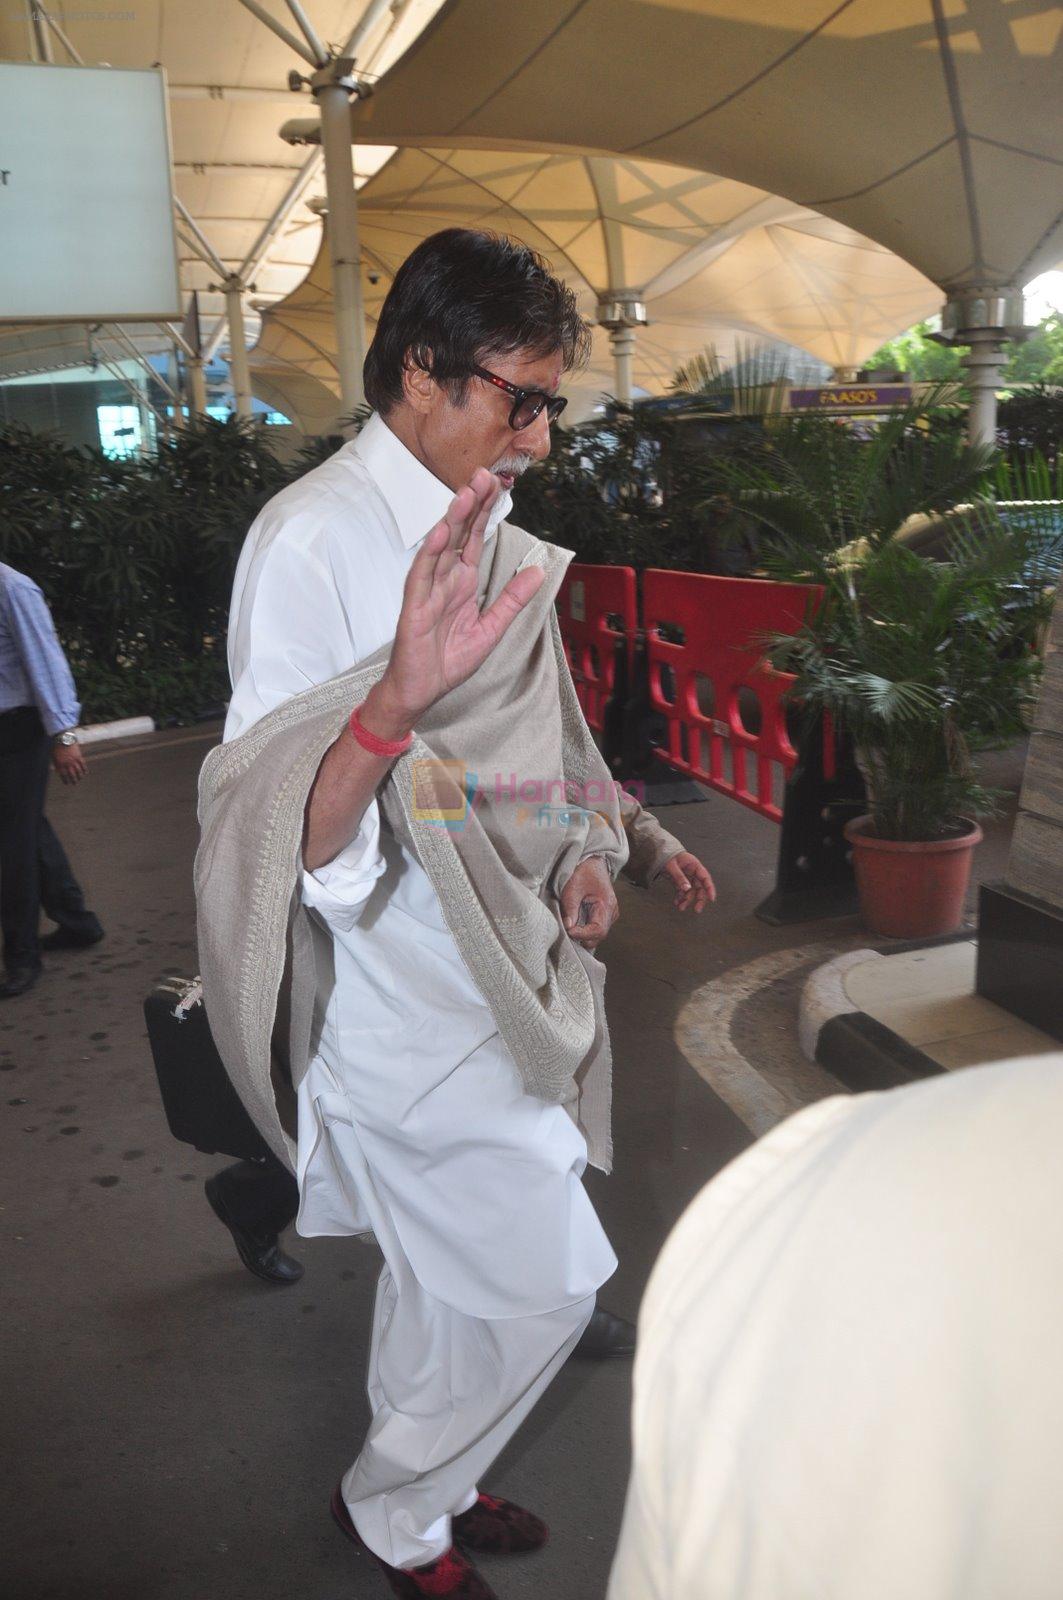 Amitabh Bachchan  snapped at airport in Mumbai on 20th Dec 2014